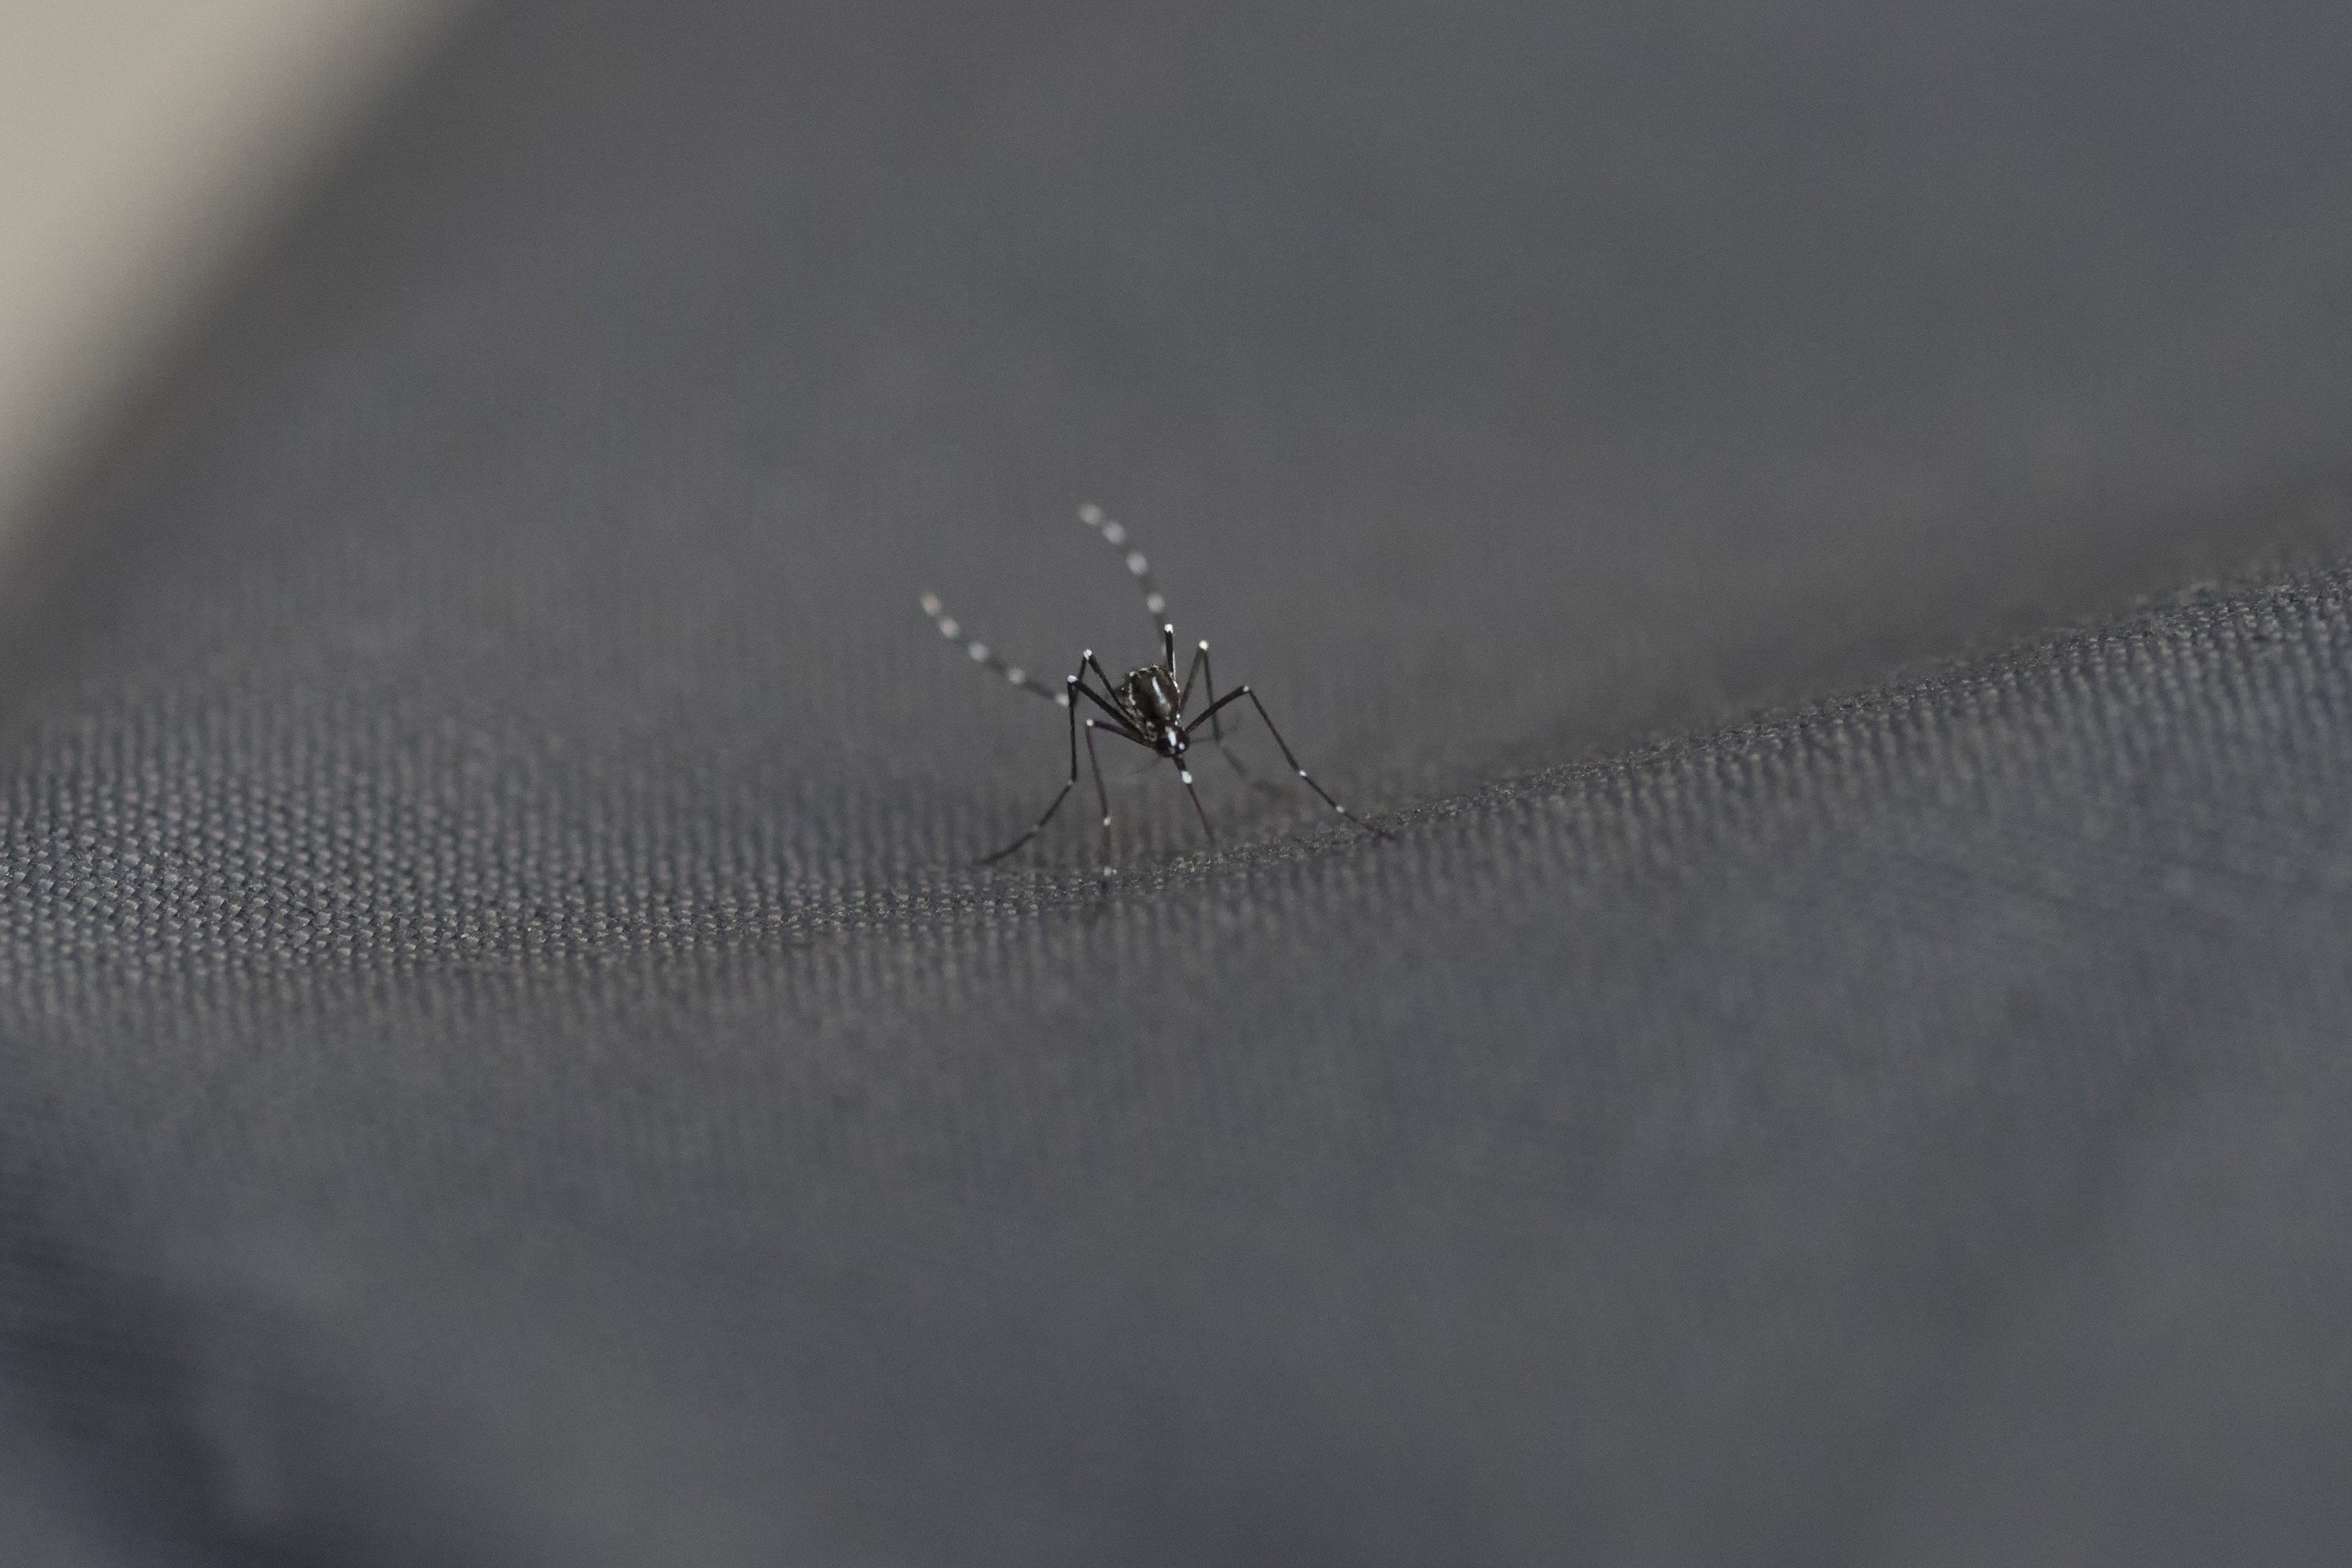 Mosquito on a piece of clothing.